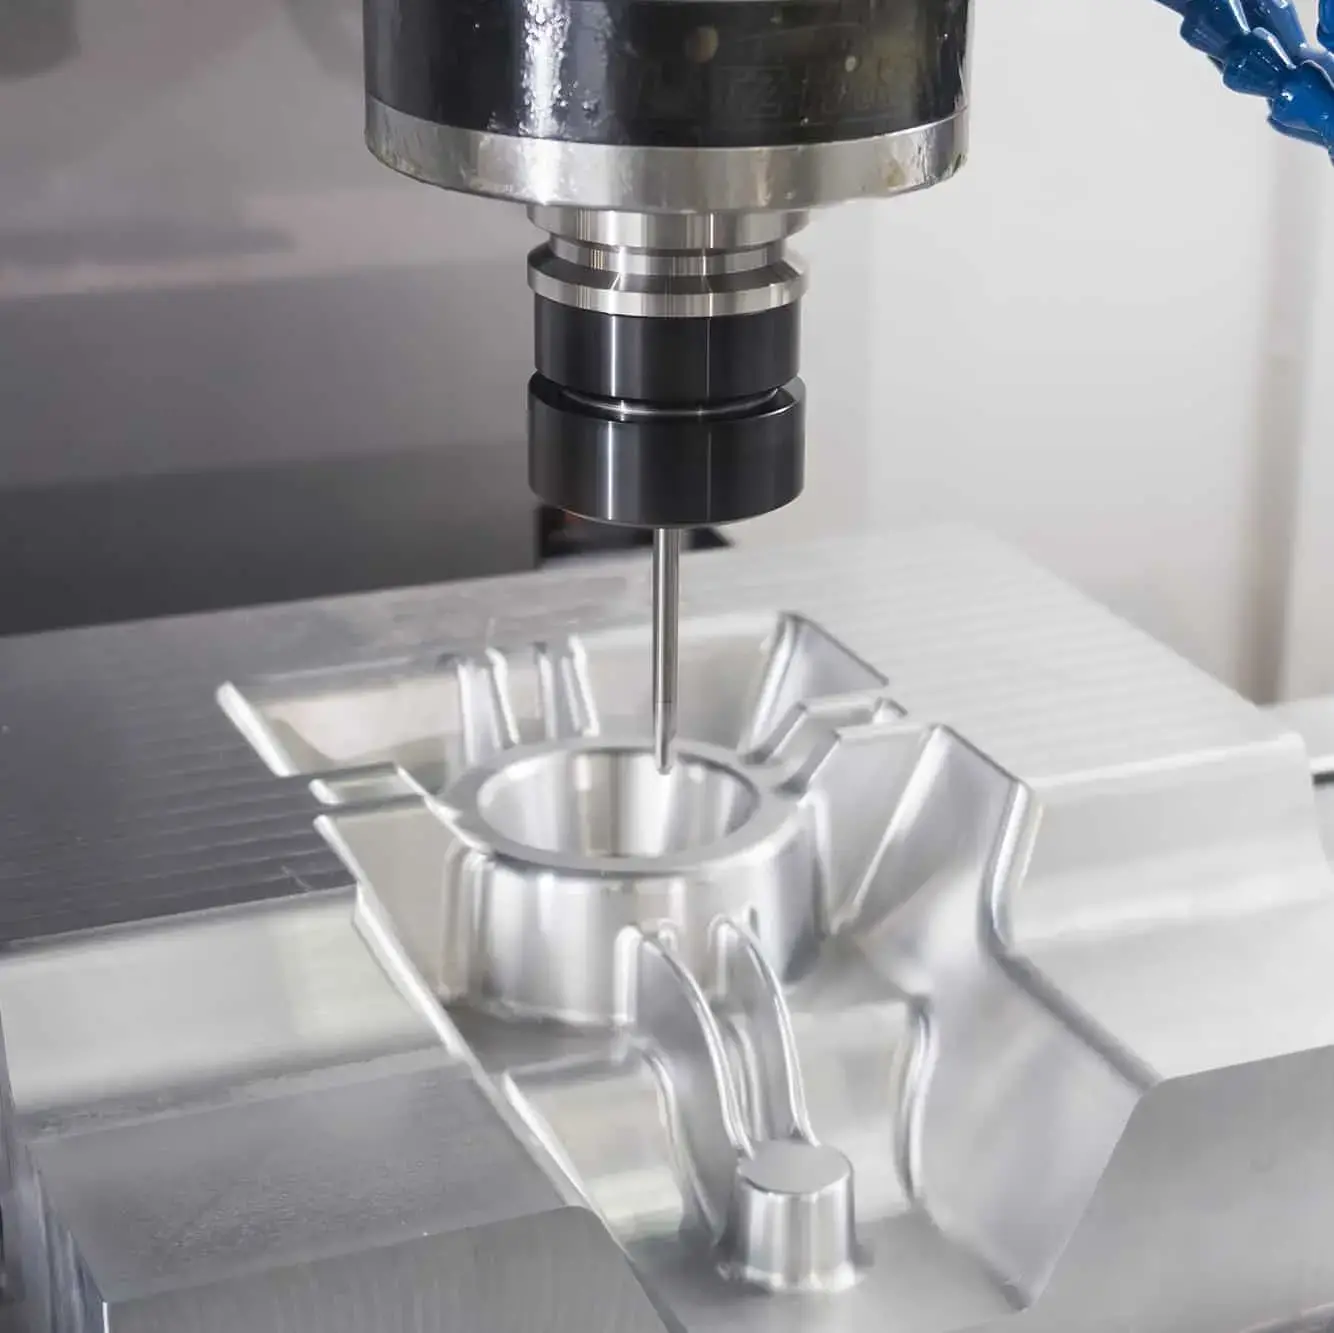 cnc machine parts and their function